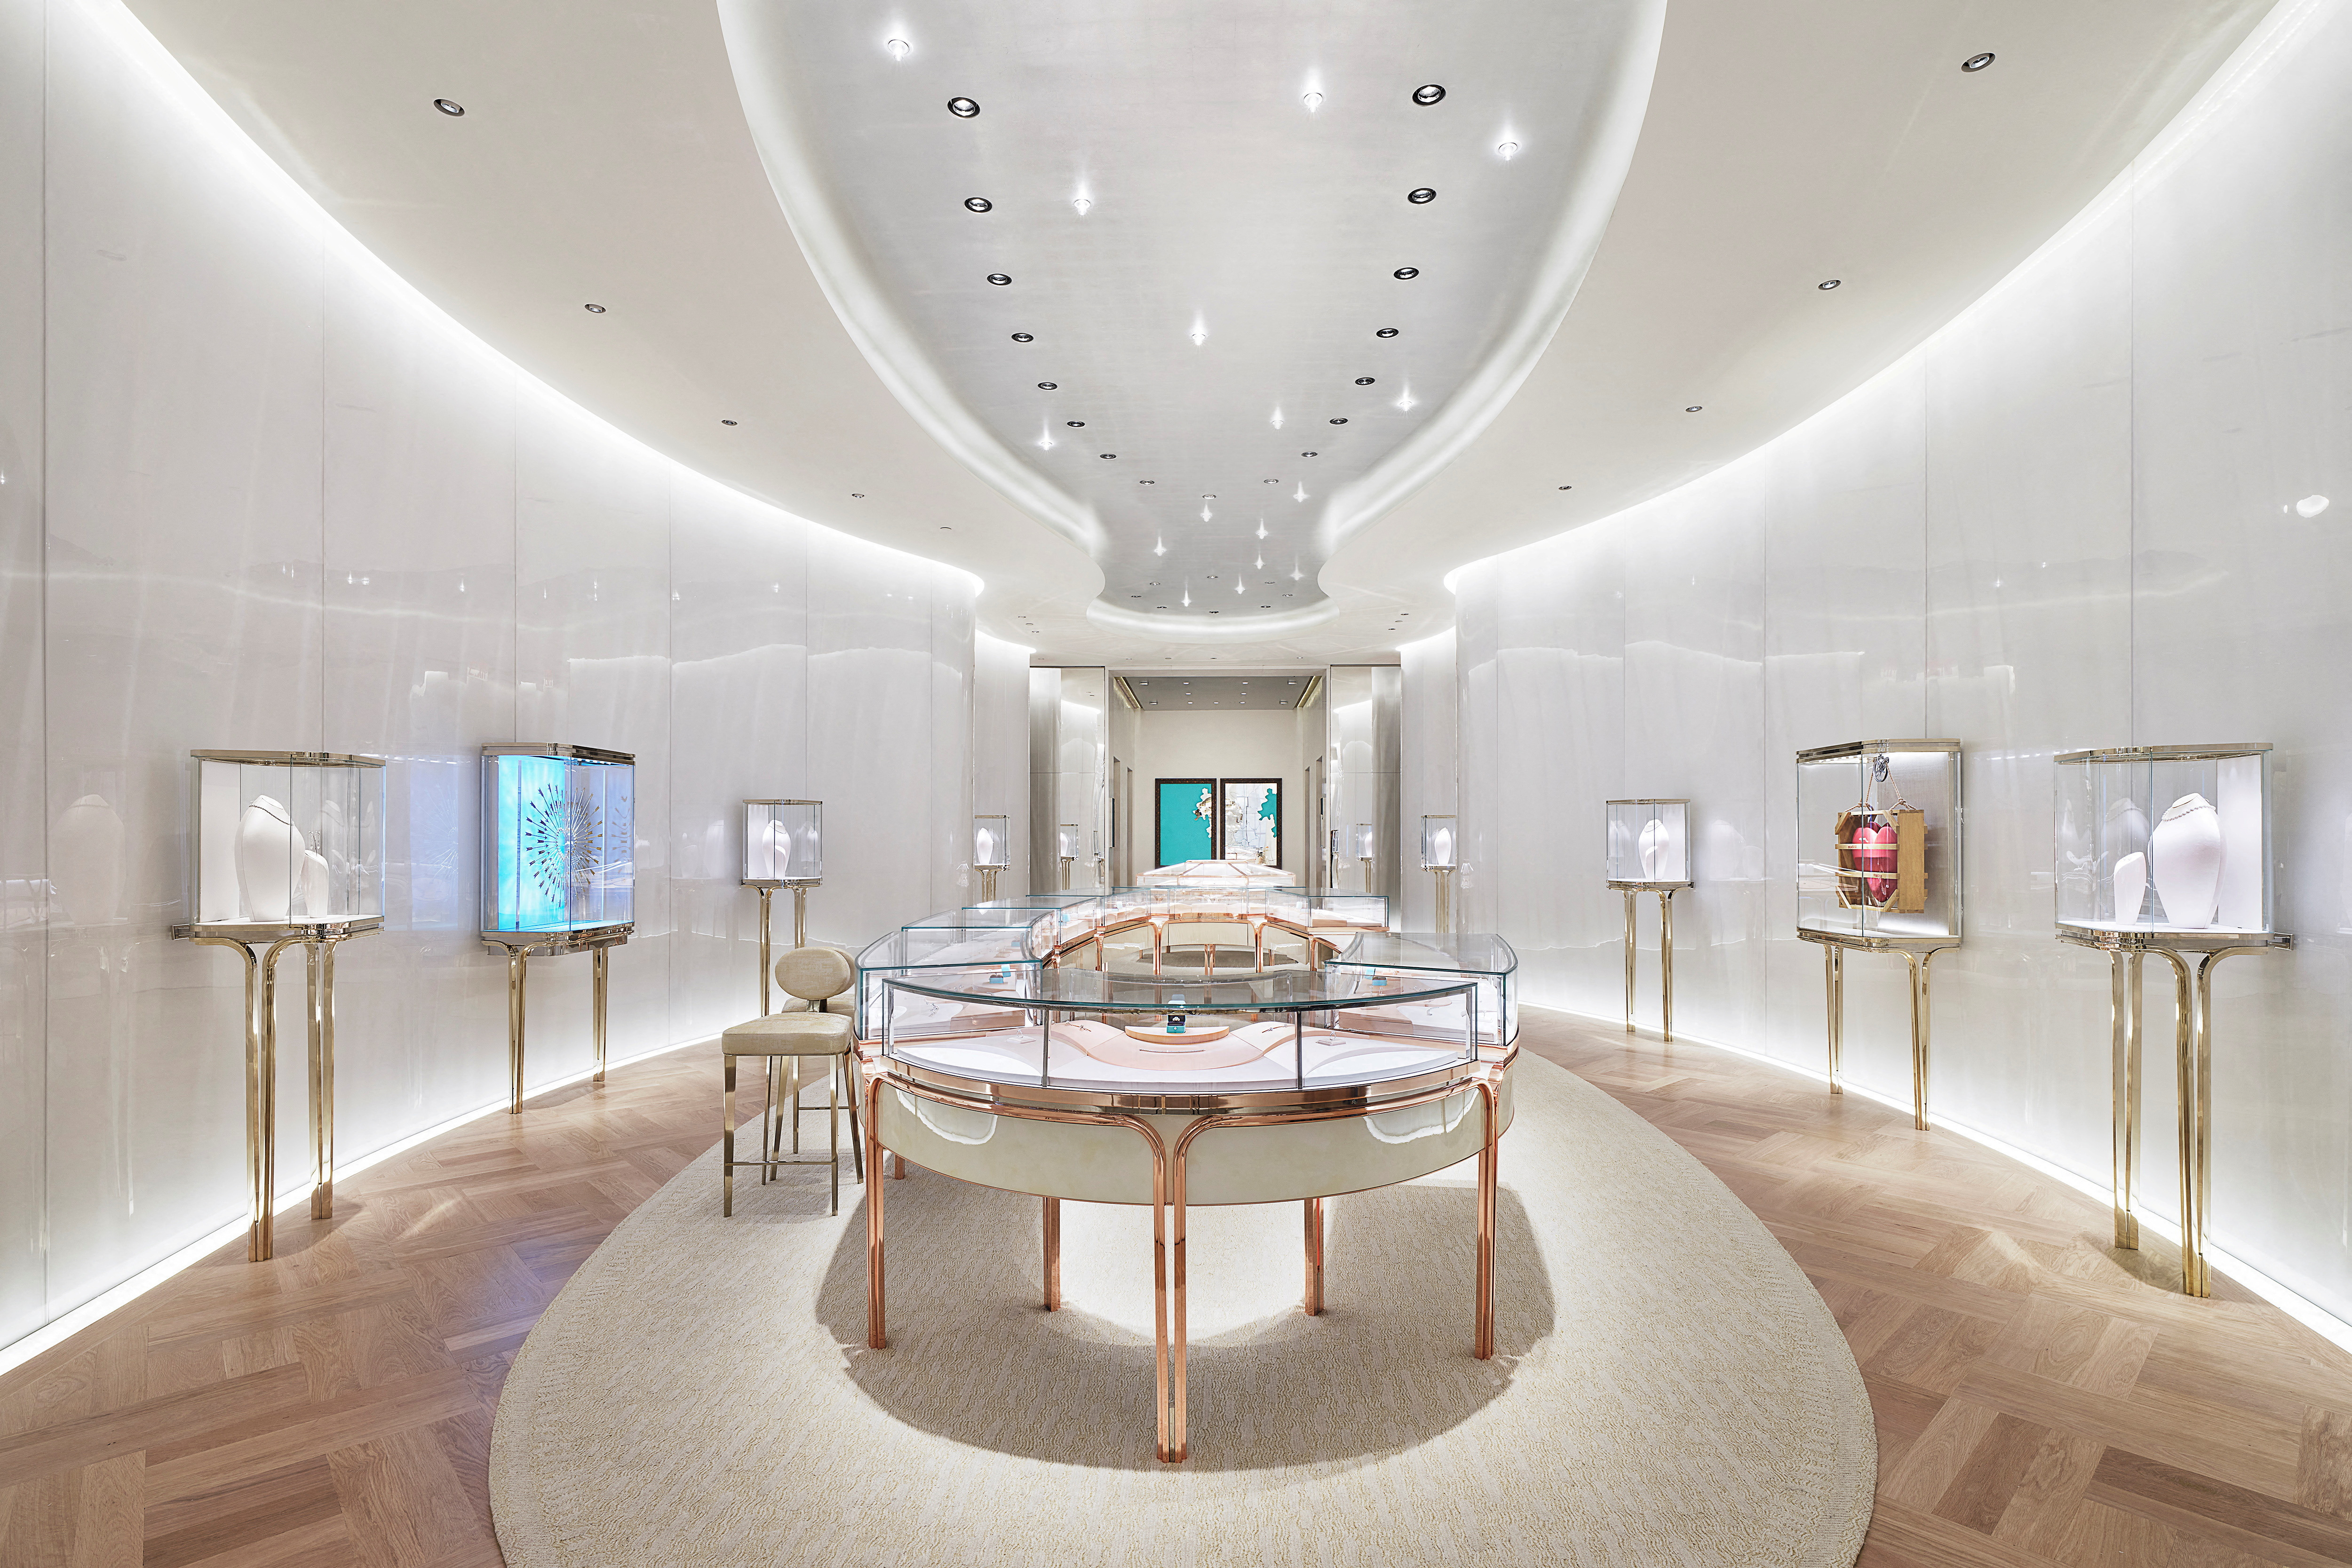 Focus: LVMH zeros in on China for global Tiffany & Co overhaul